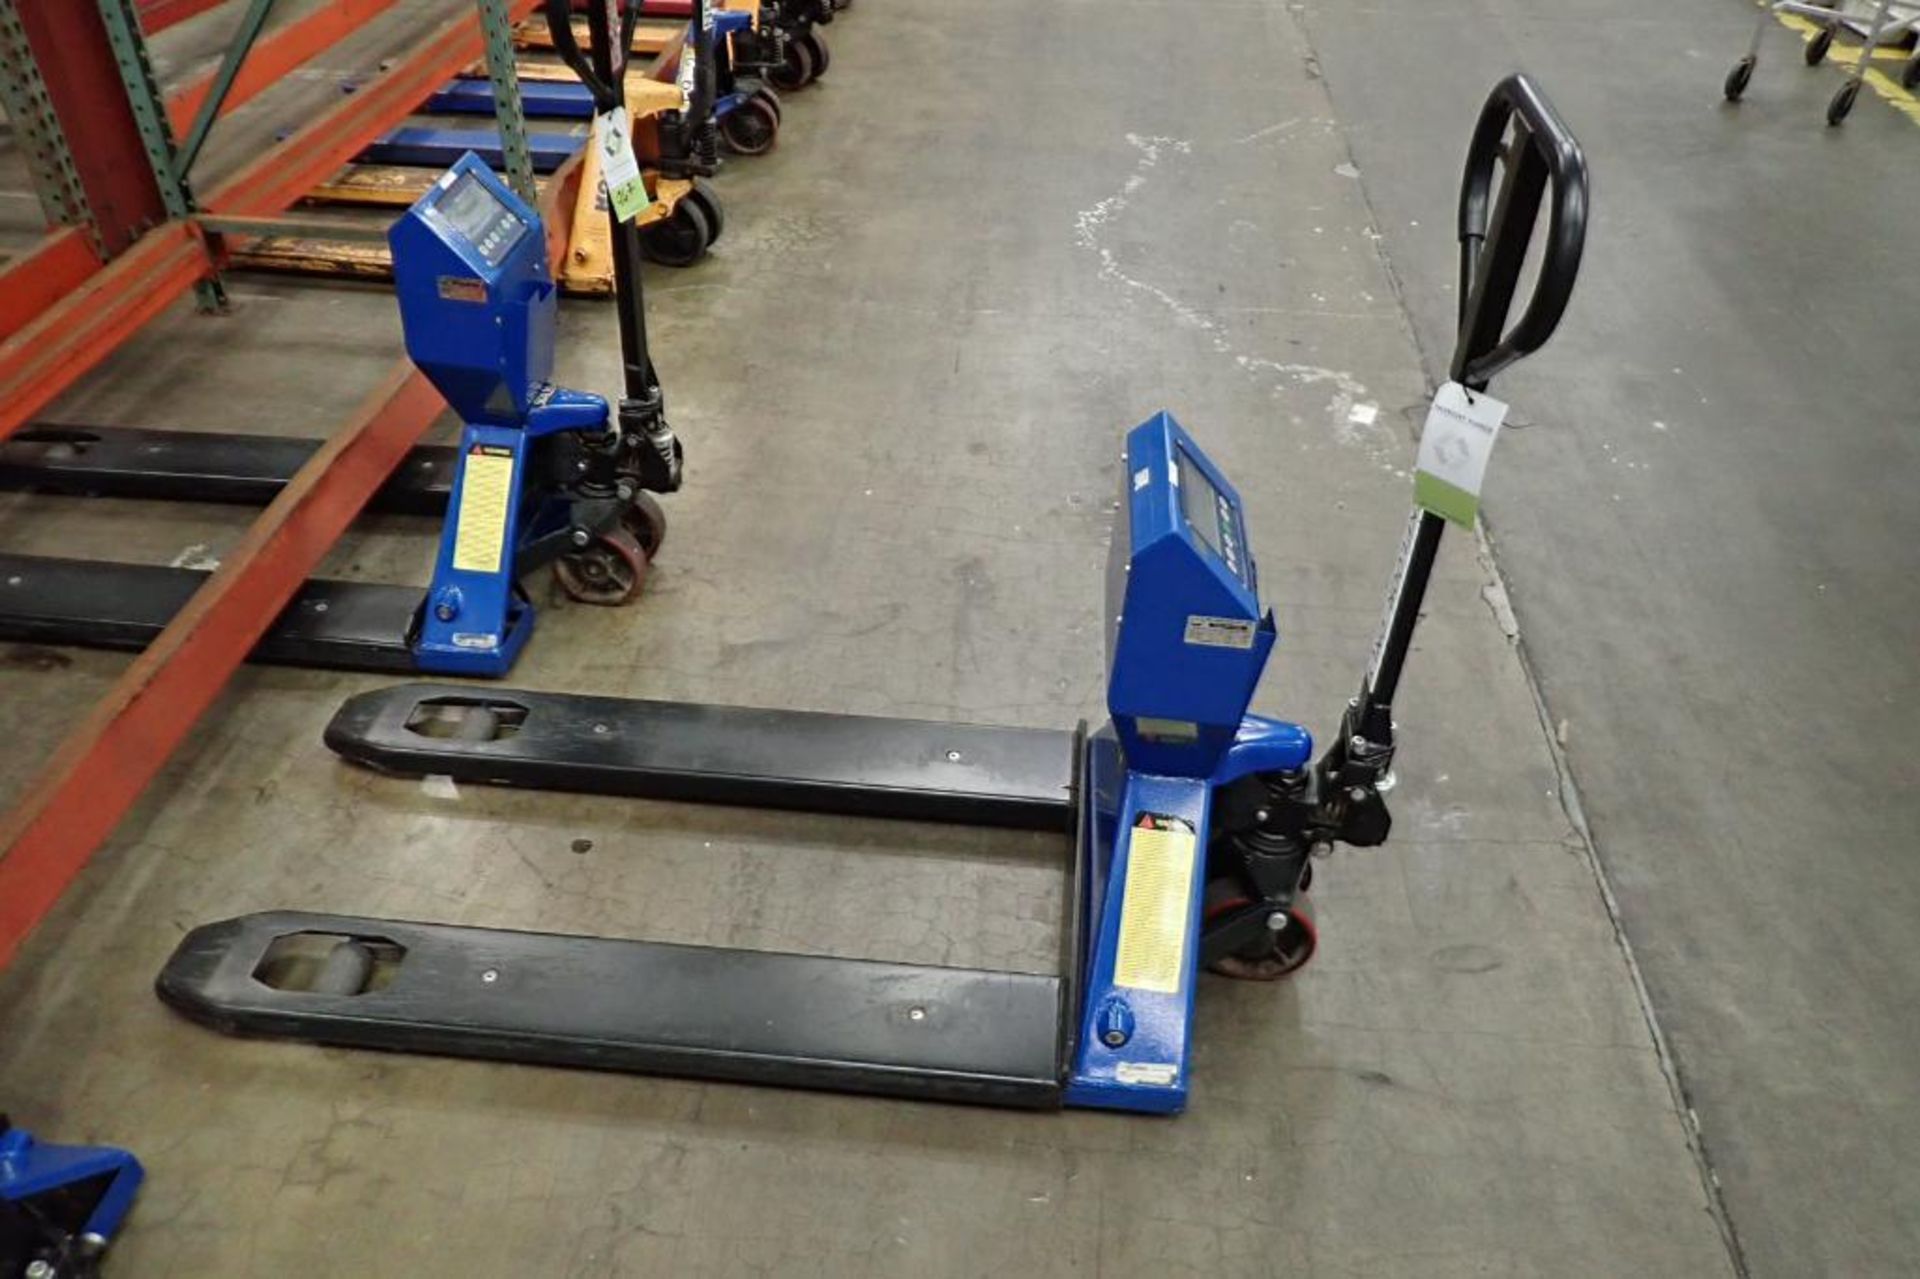 Global Industrial hand pallet jack, SN 377843, with Mettler Toledo on board scale, 5000 lb capacity,